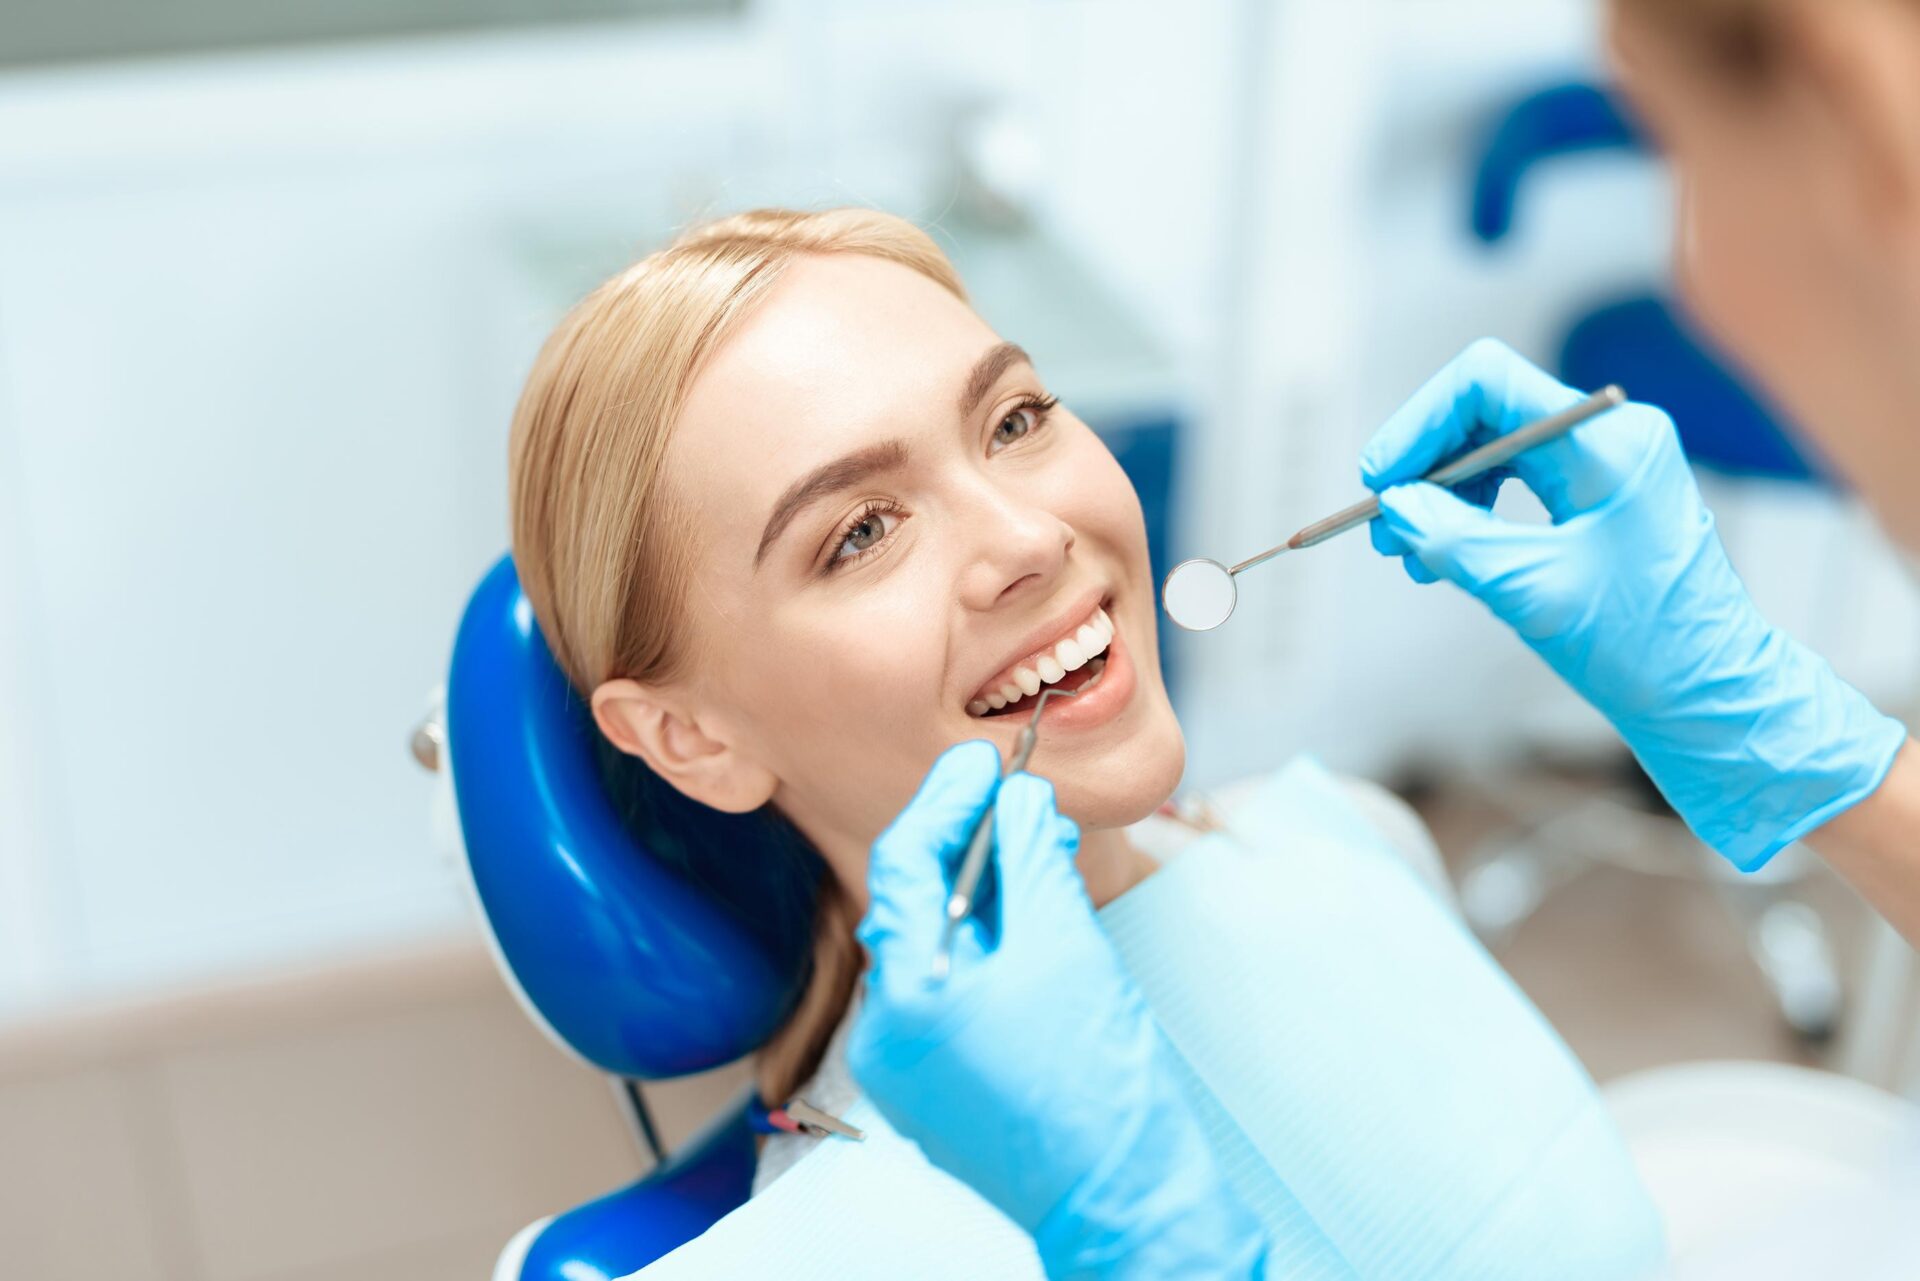 Dentist in Hawick: Your Trusted Partner in Dental Care